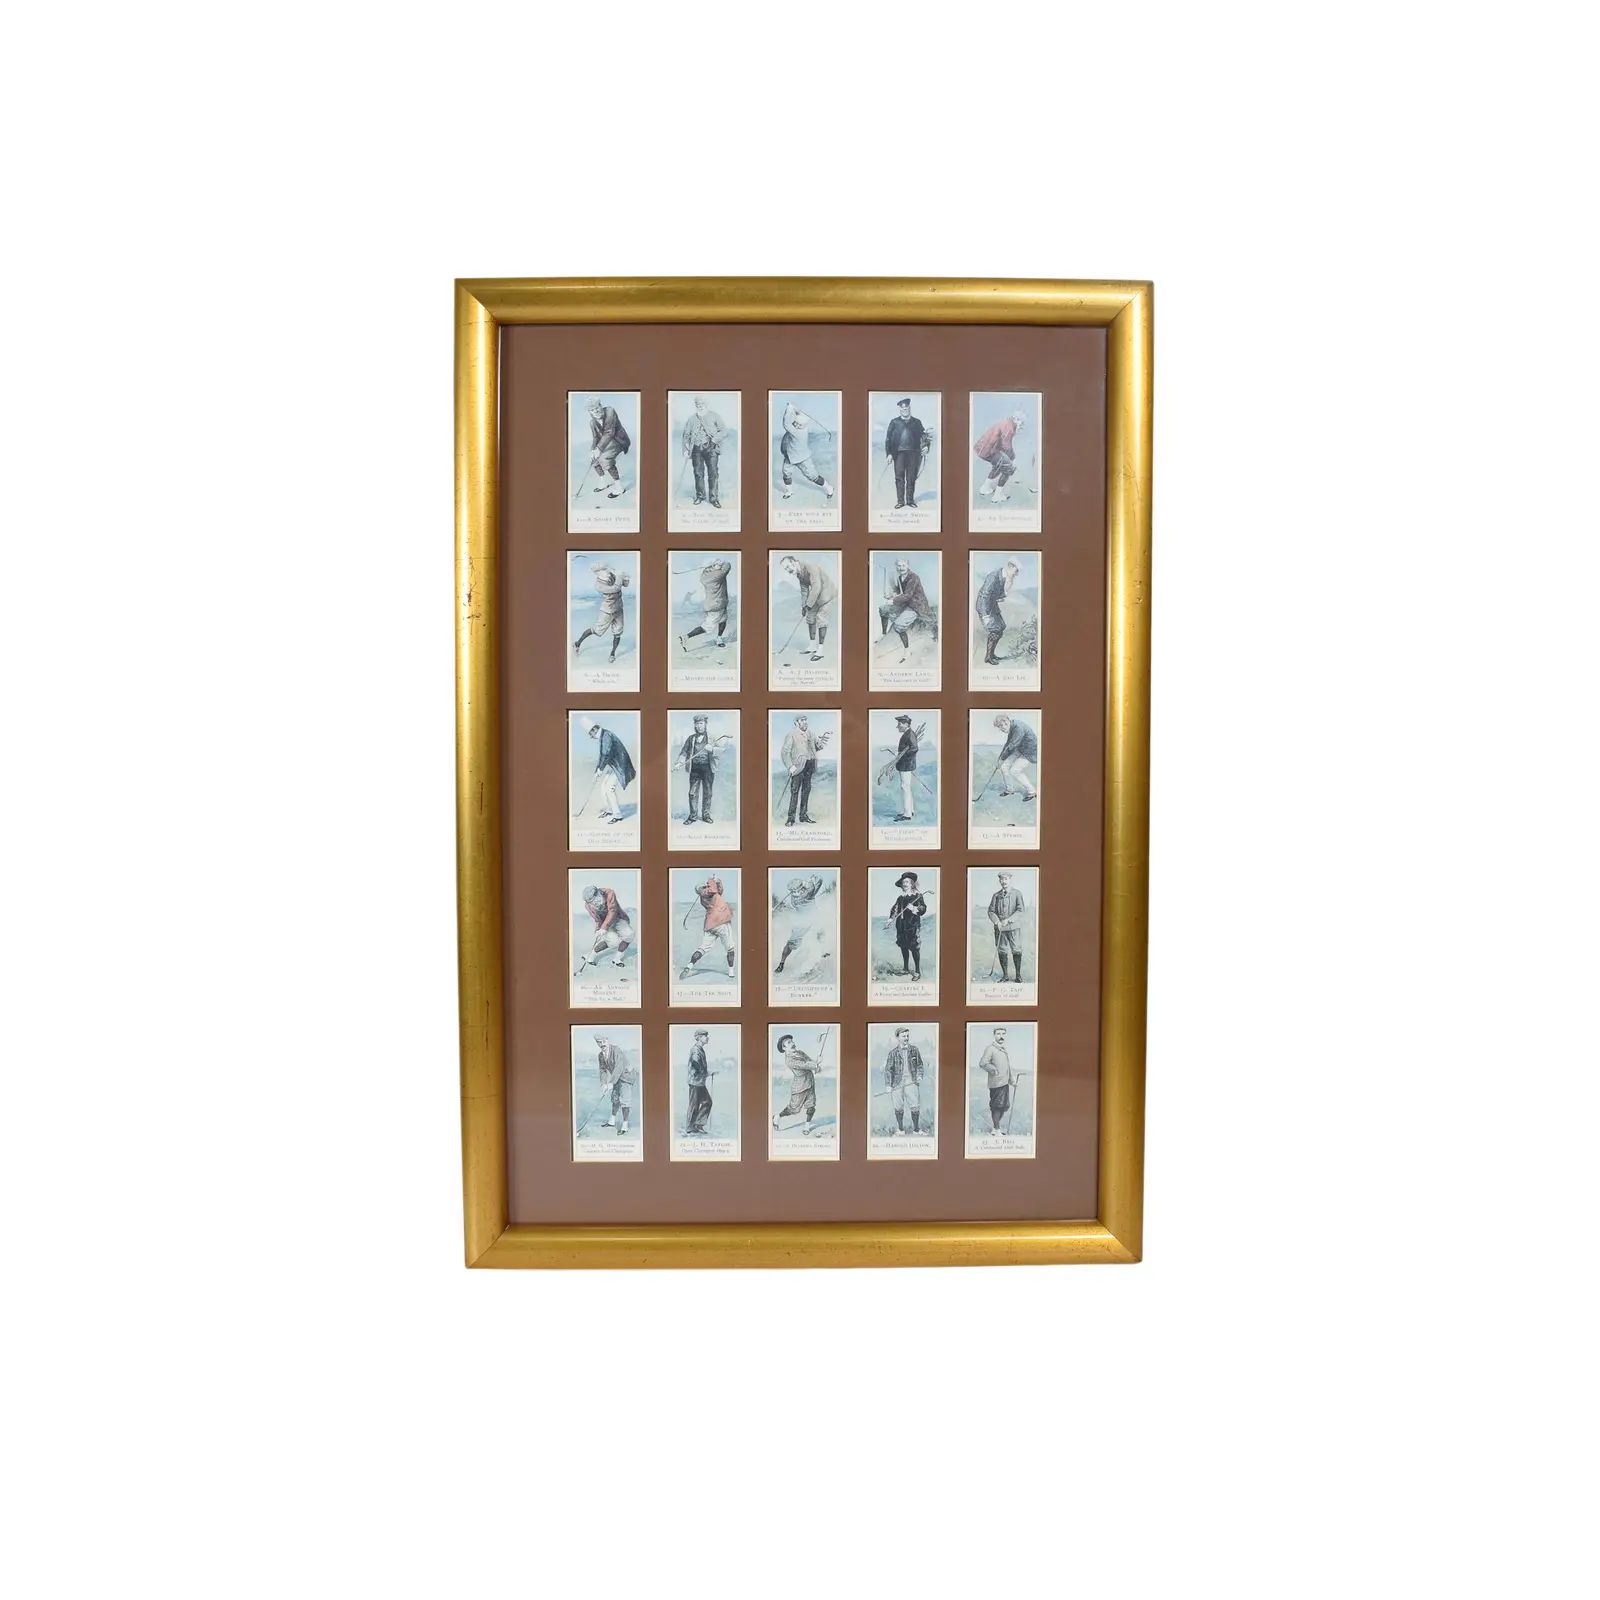 Traditional Print of 25 Framed Cope's Bros. Co Tobacco Cope's Golfers Nostalgia Reprint Card | Chairish